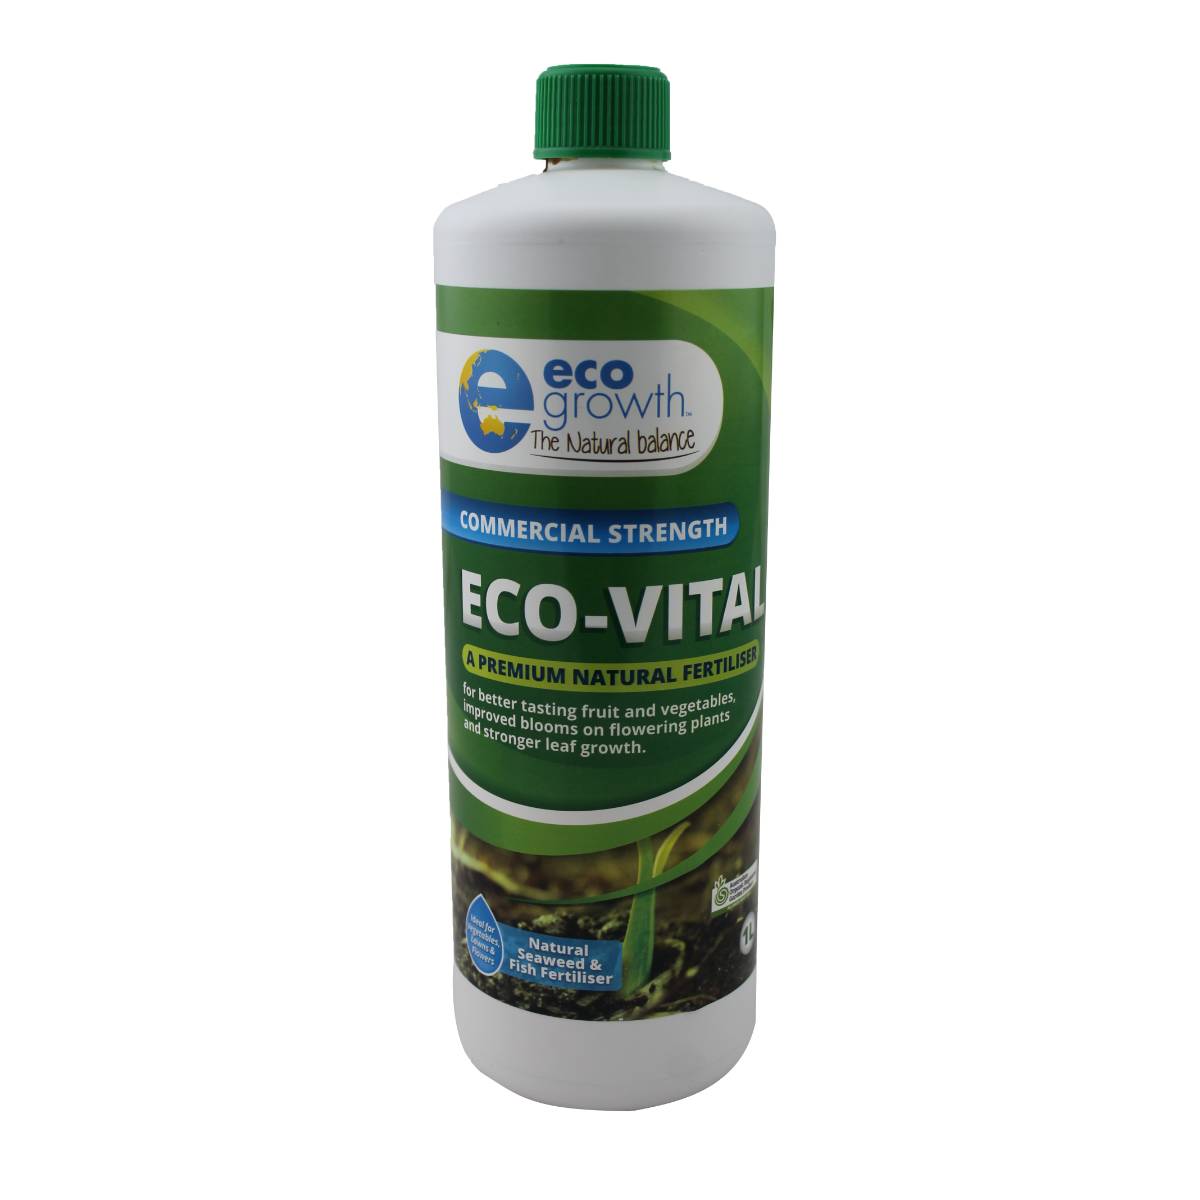 Eco Growth Eco-Vital 1L bottle - WA Only